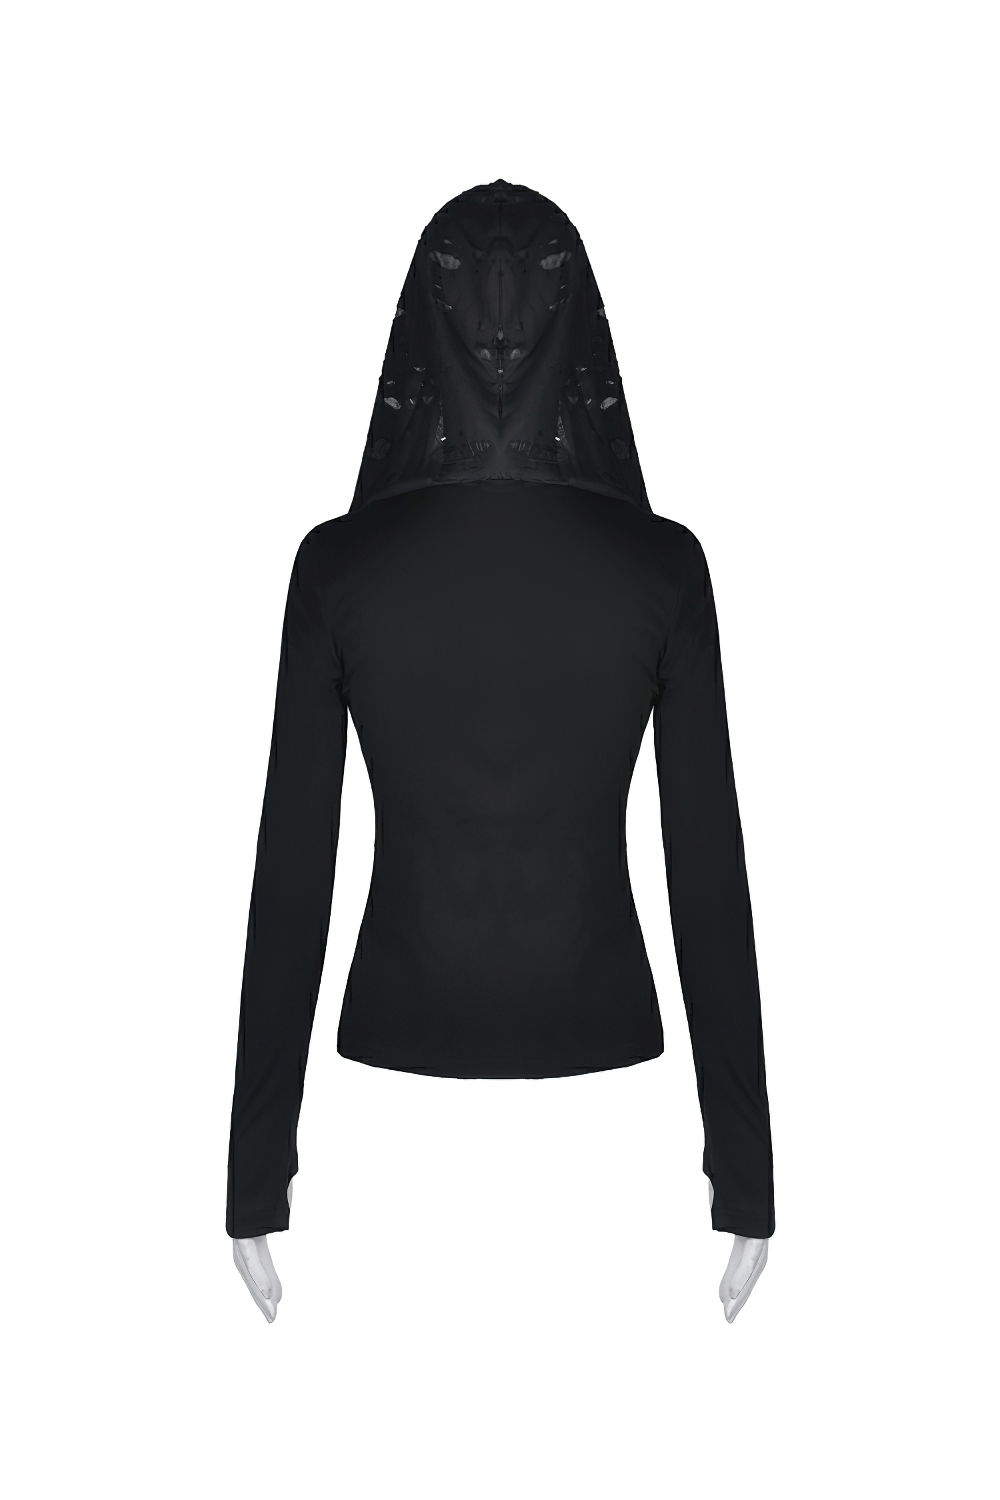 Edgy Black Hoodie with Metal Accents And Shredded Hood